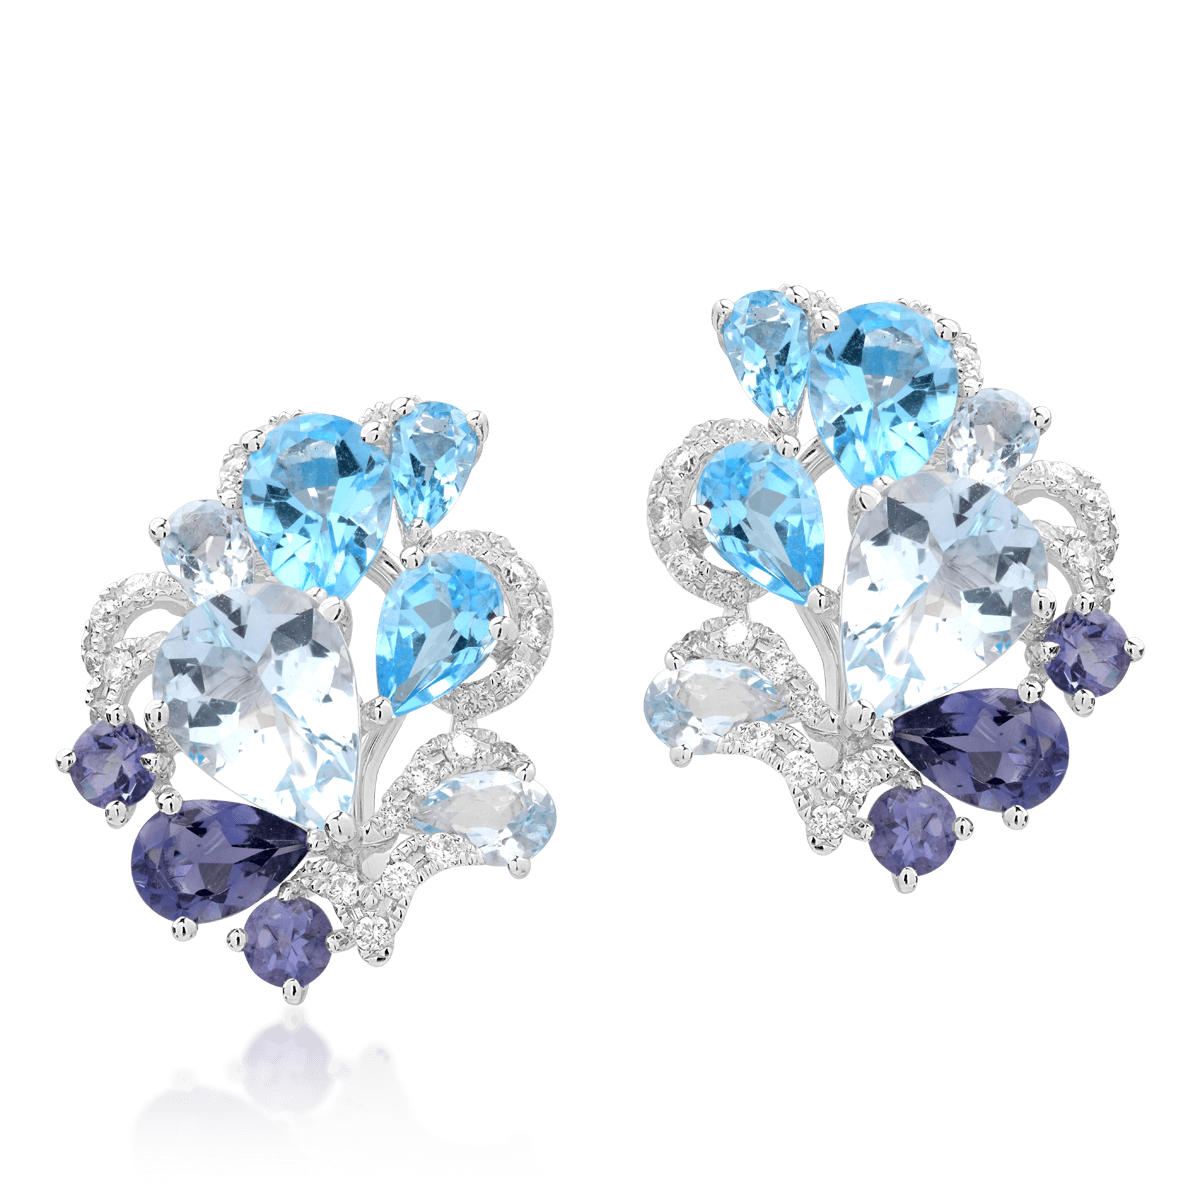 18K white gold earrings with 8.81ct precious and semiprecious stones